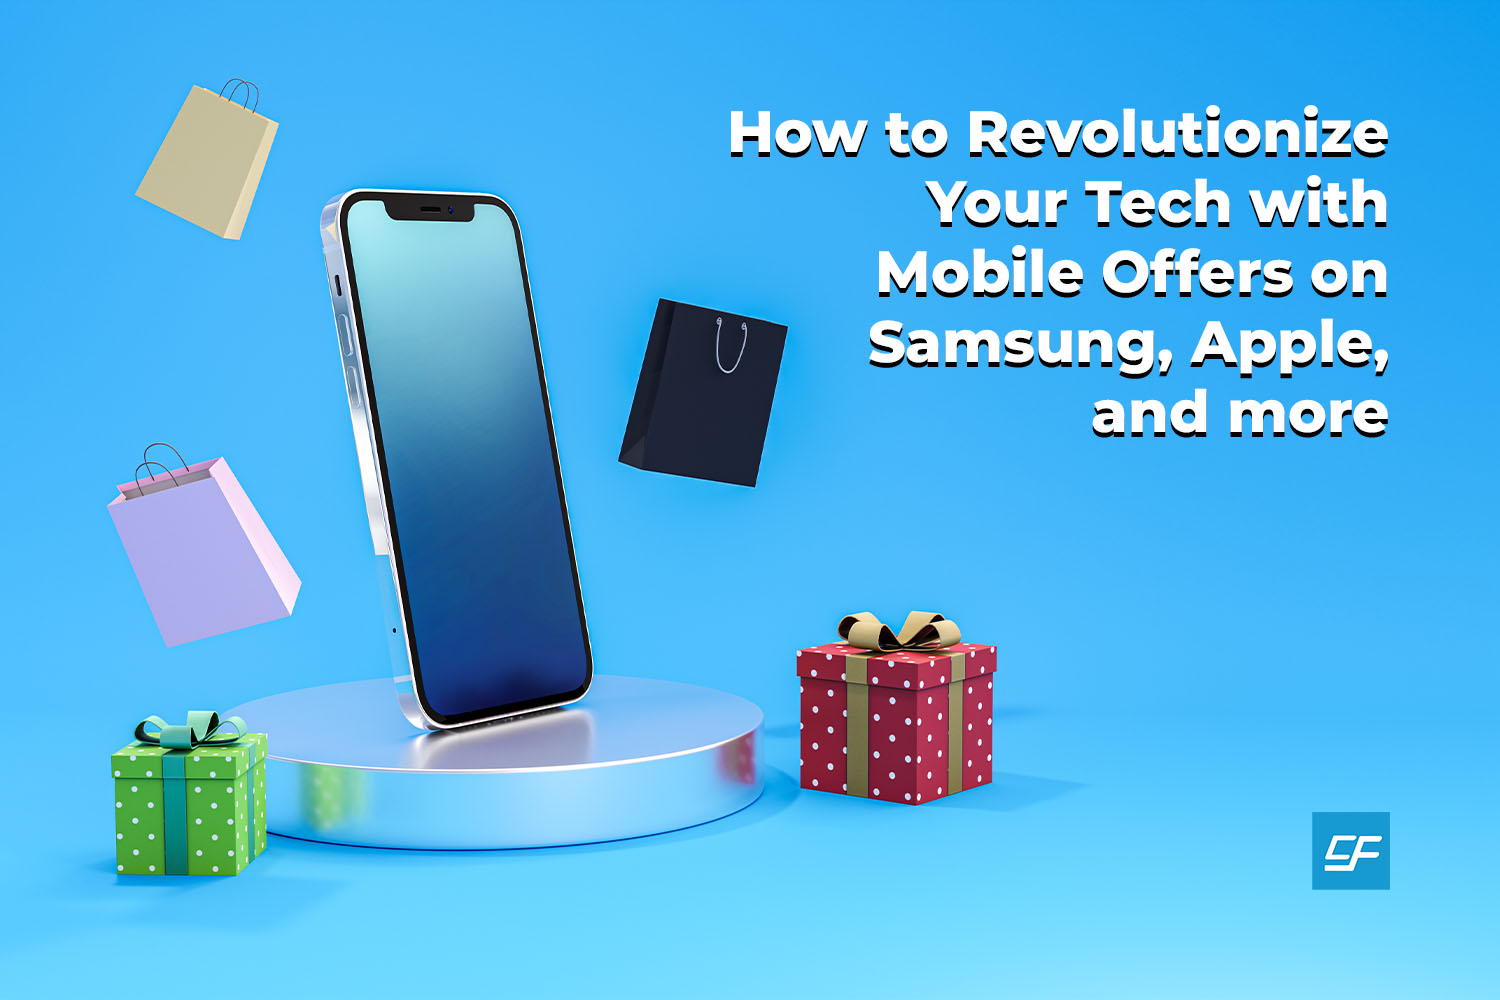 Revolutionize Your Tech: Mobile Offers on Samsung, Apple